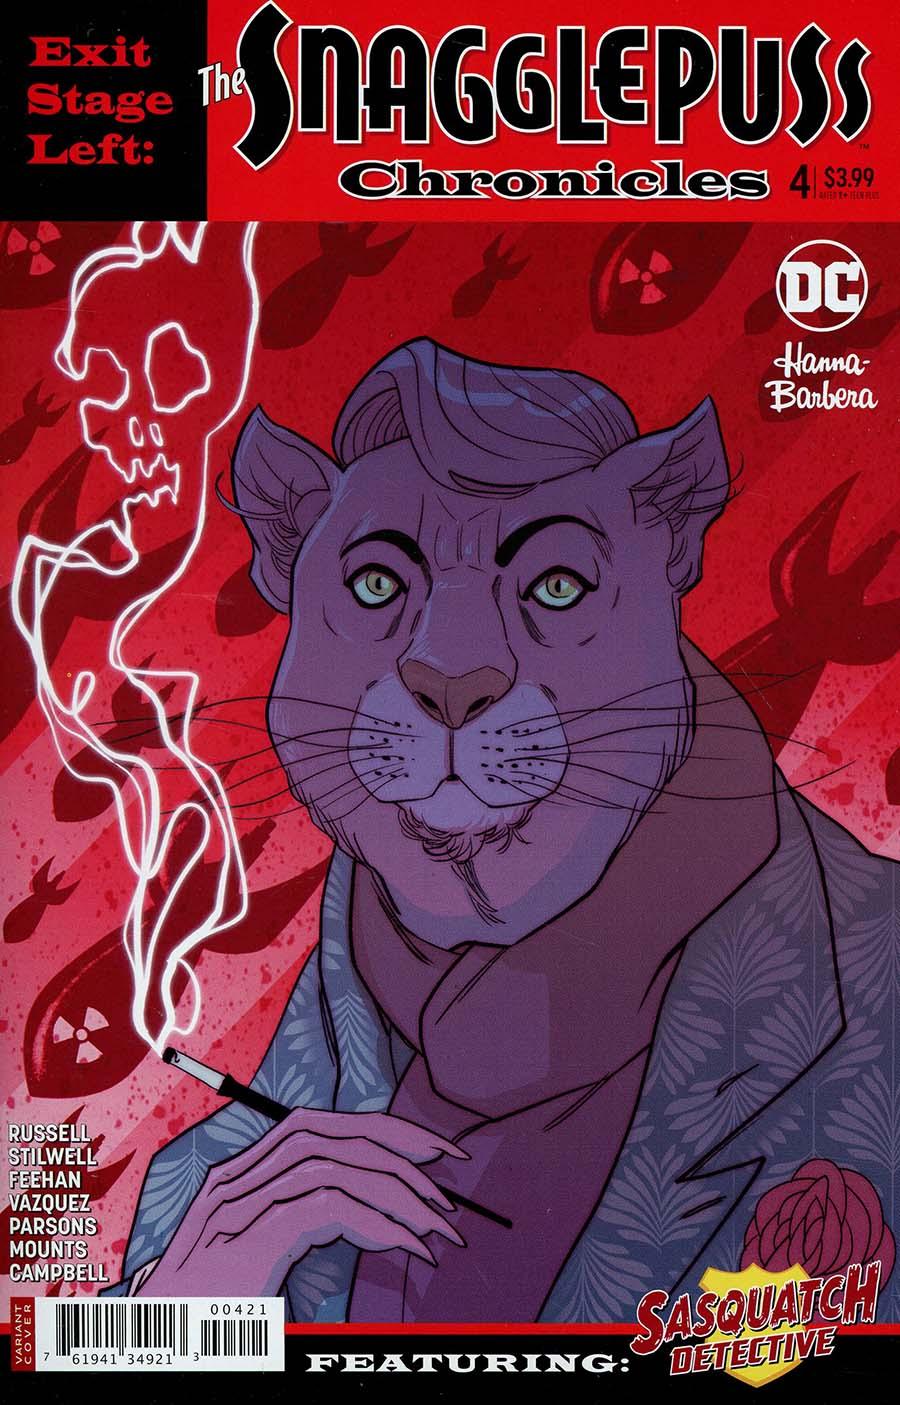 Exit Stage Left The Snagglepuss Chronicles Vol. 1 #4